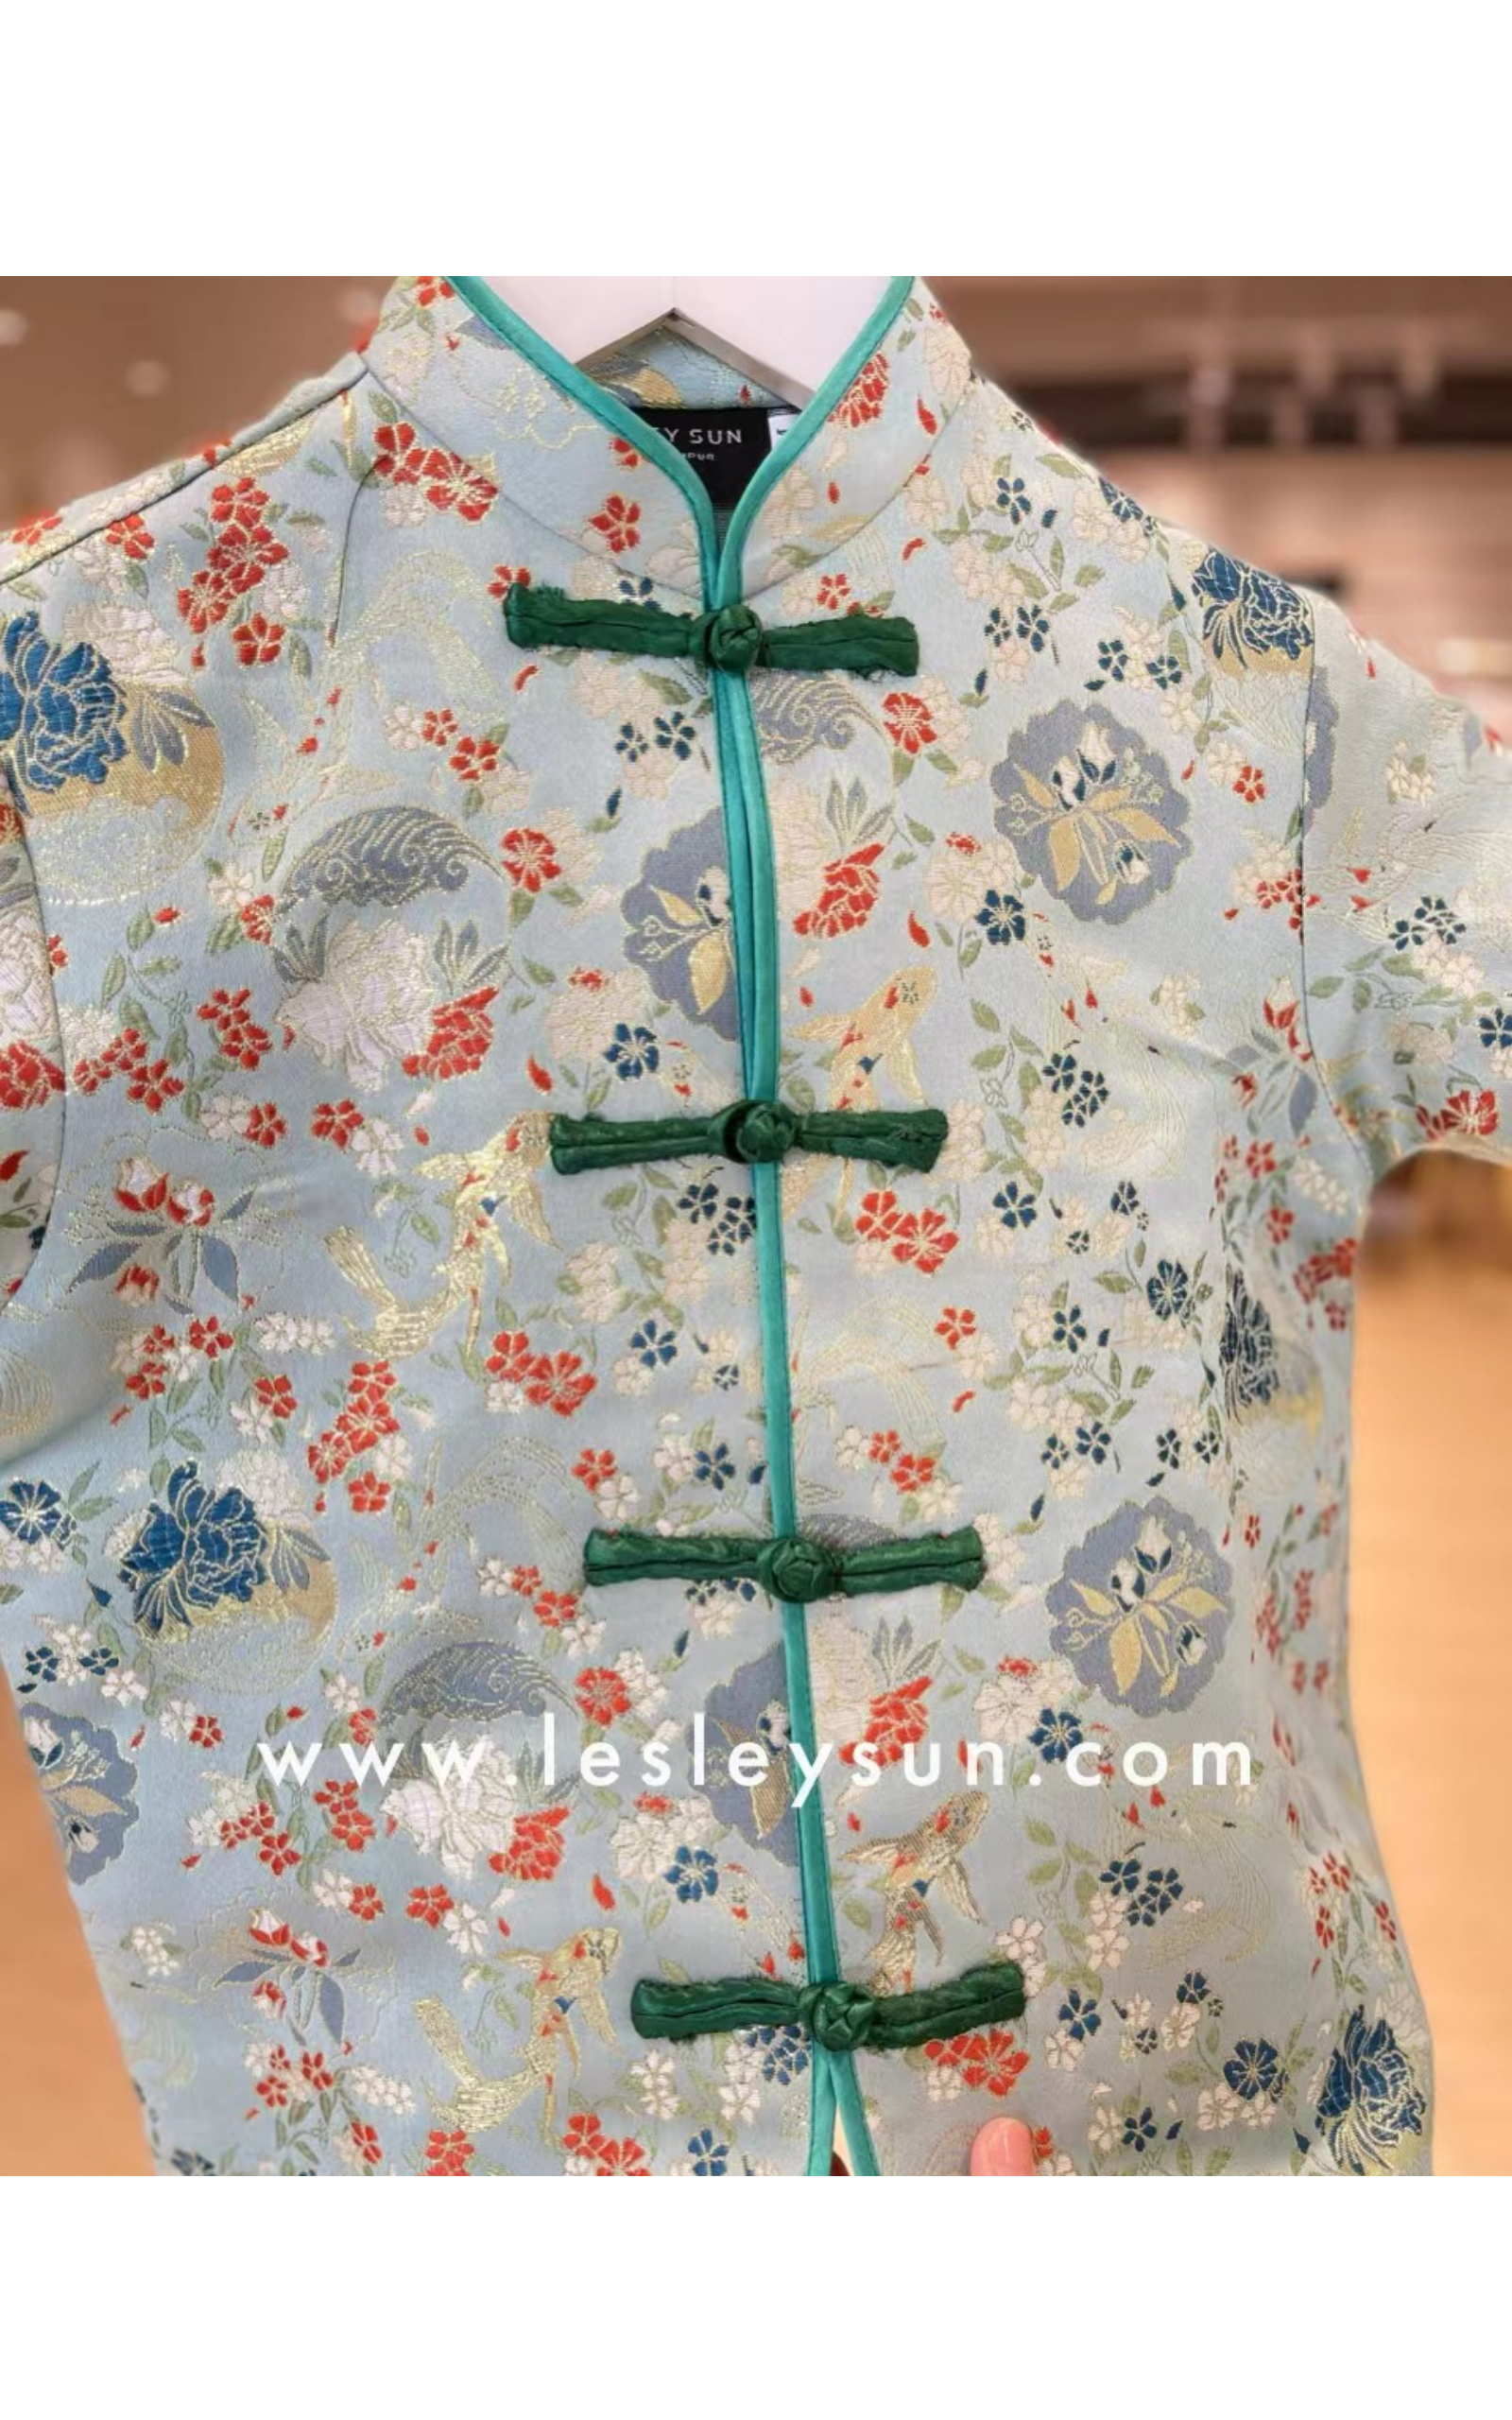 Frostinne Orient Top (Kids Male) Complimentary with matching adult design, do not sell separately